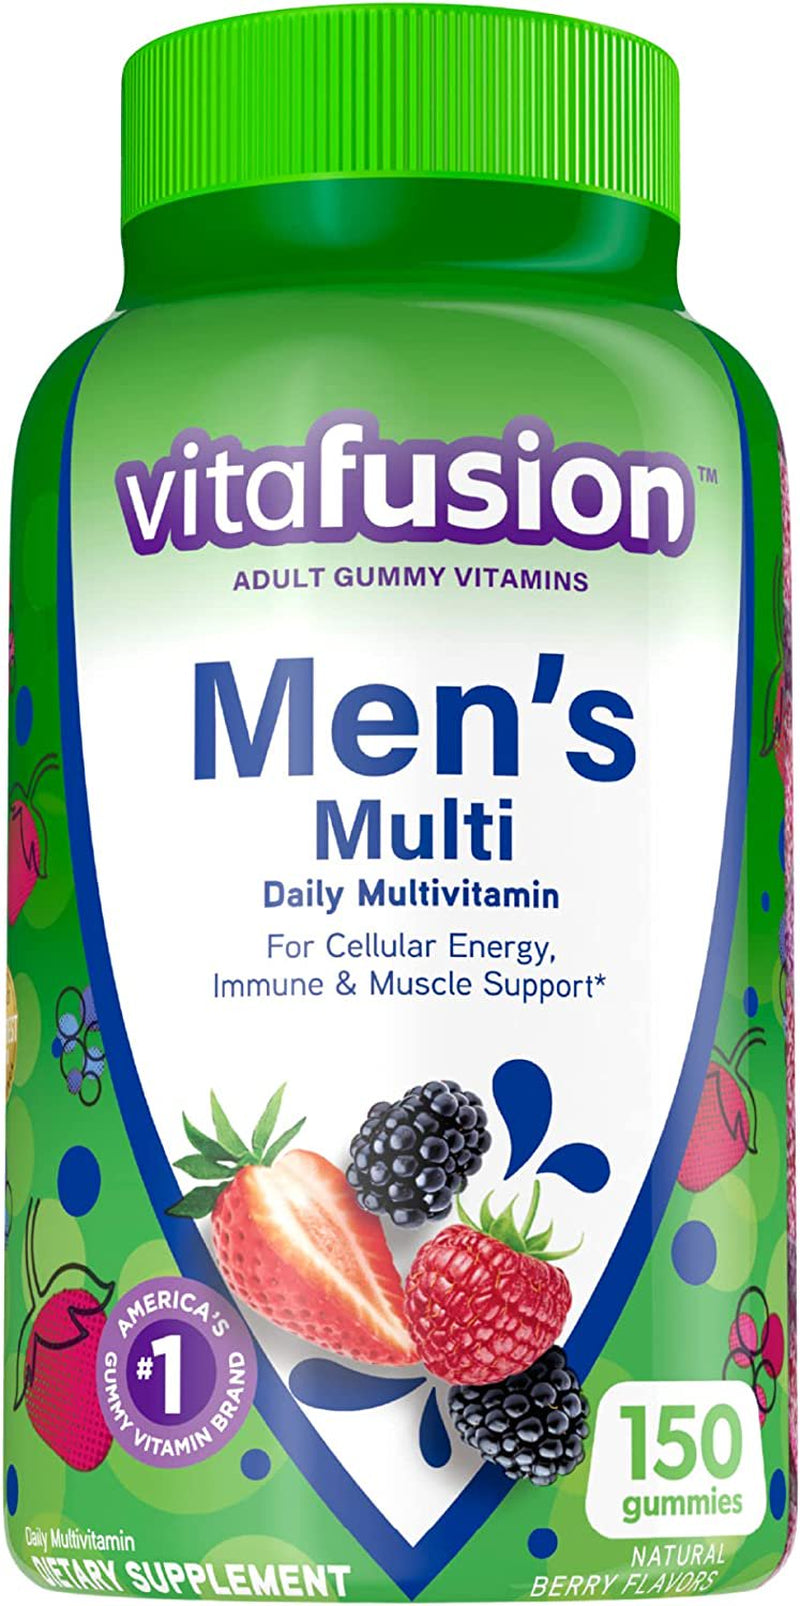 Vitafusion Gummy Vitamins for Men, Berry Flavored Daily Multivitamins for Men, 150 Count